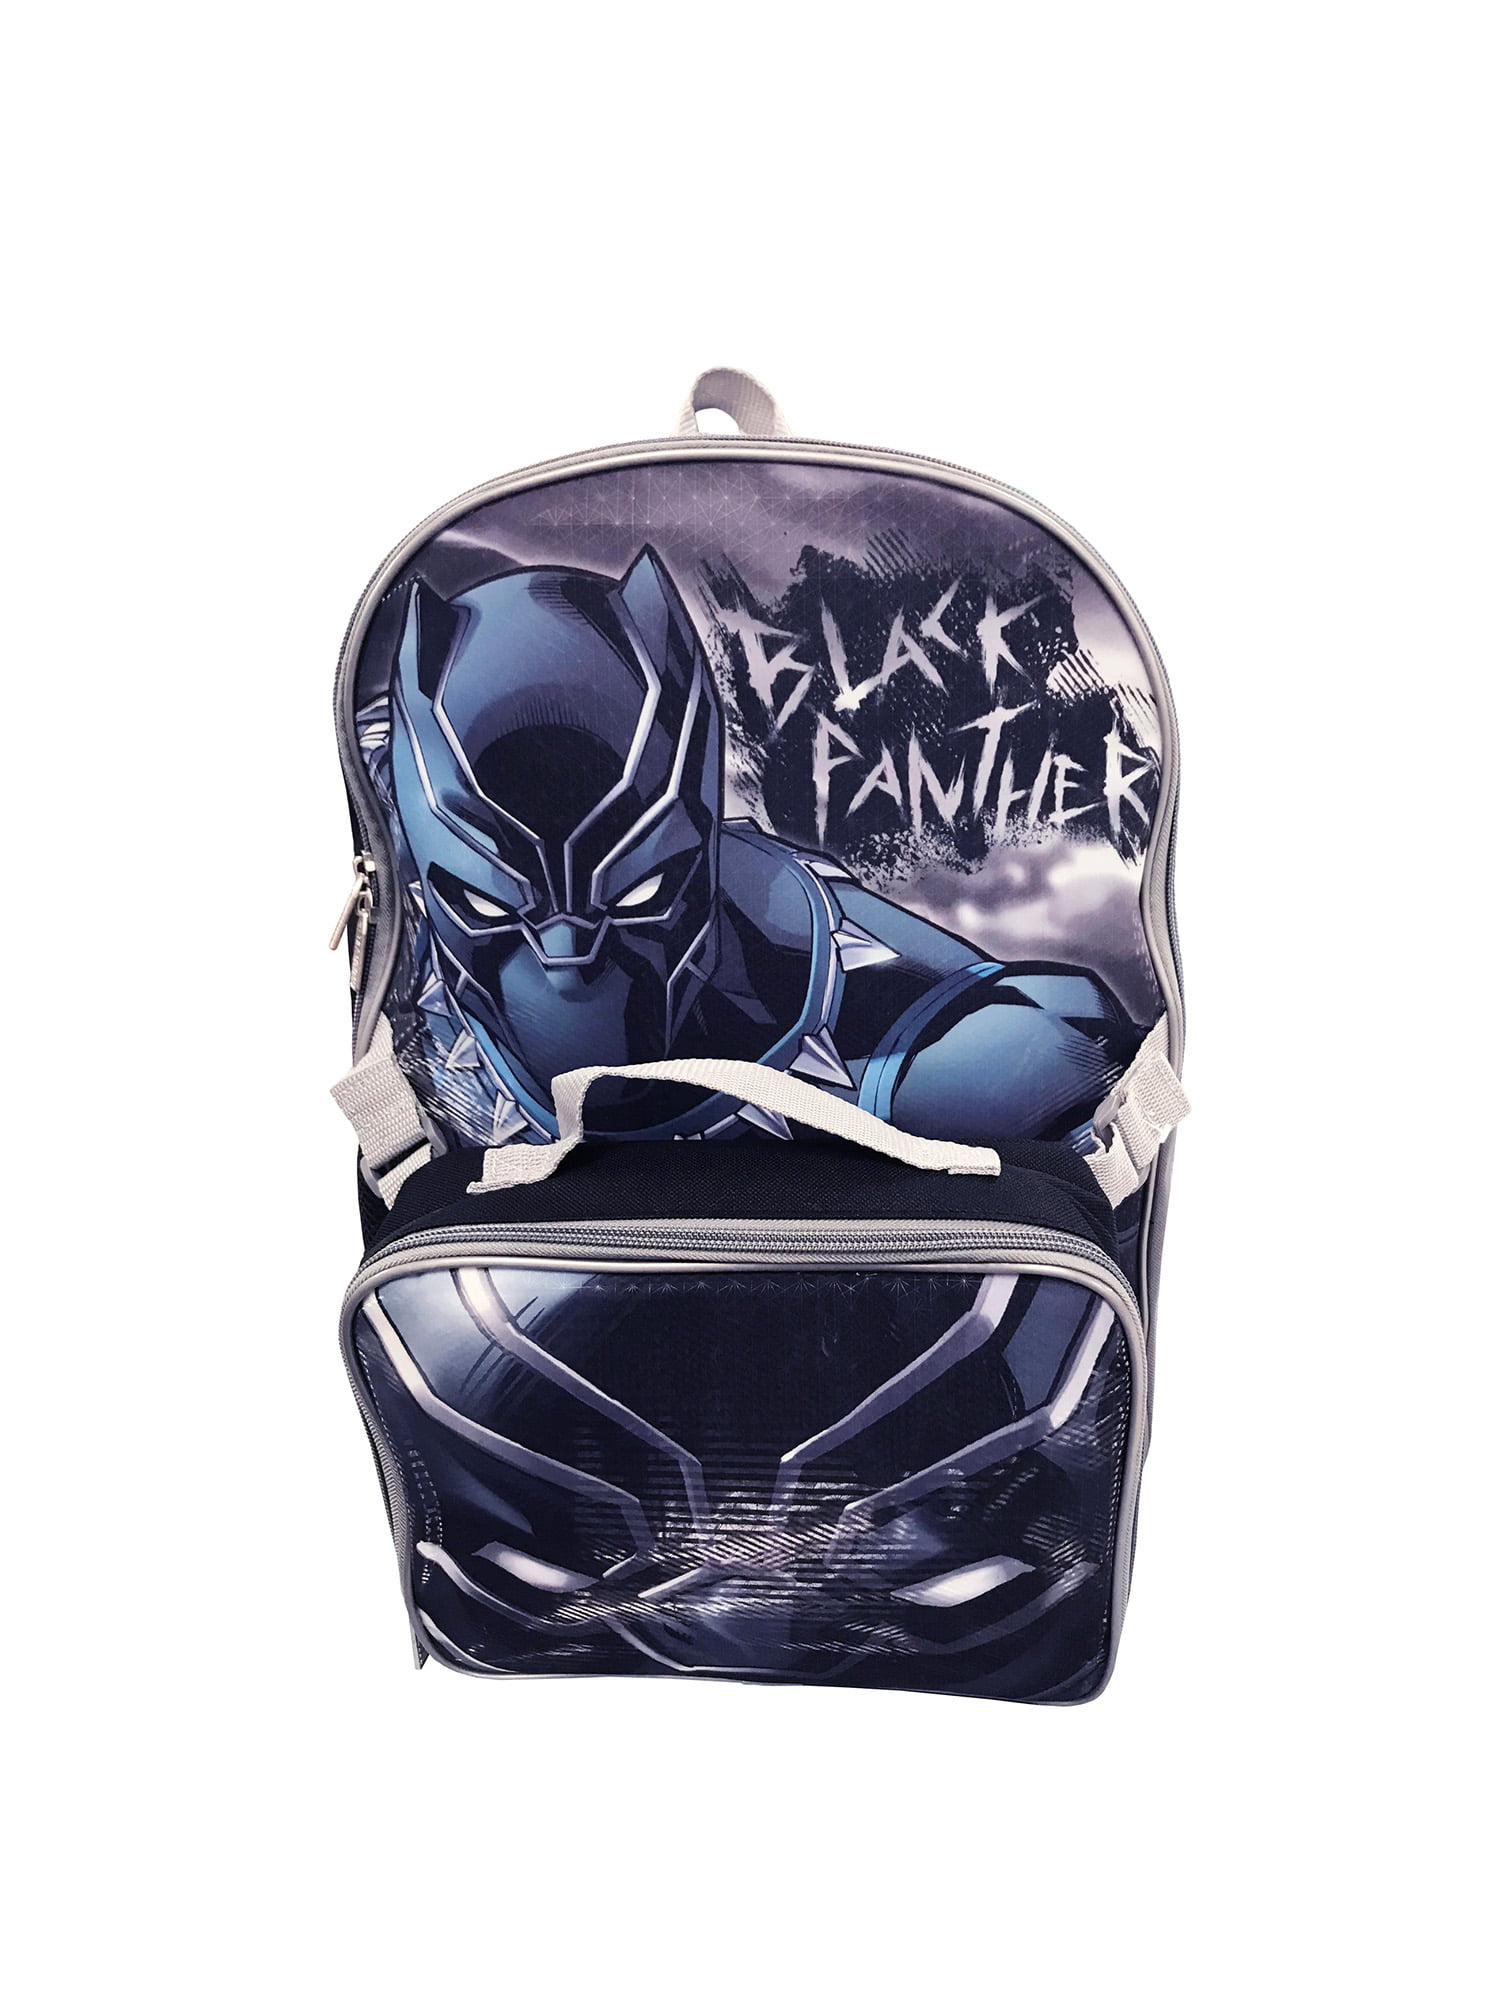 Black Panther backpack and lunch bag set | Walmart Canada